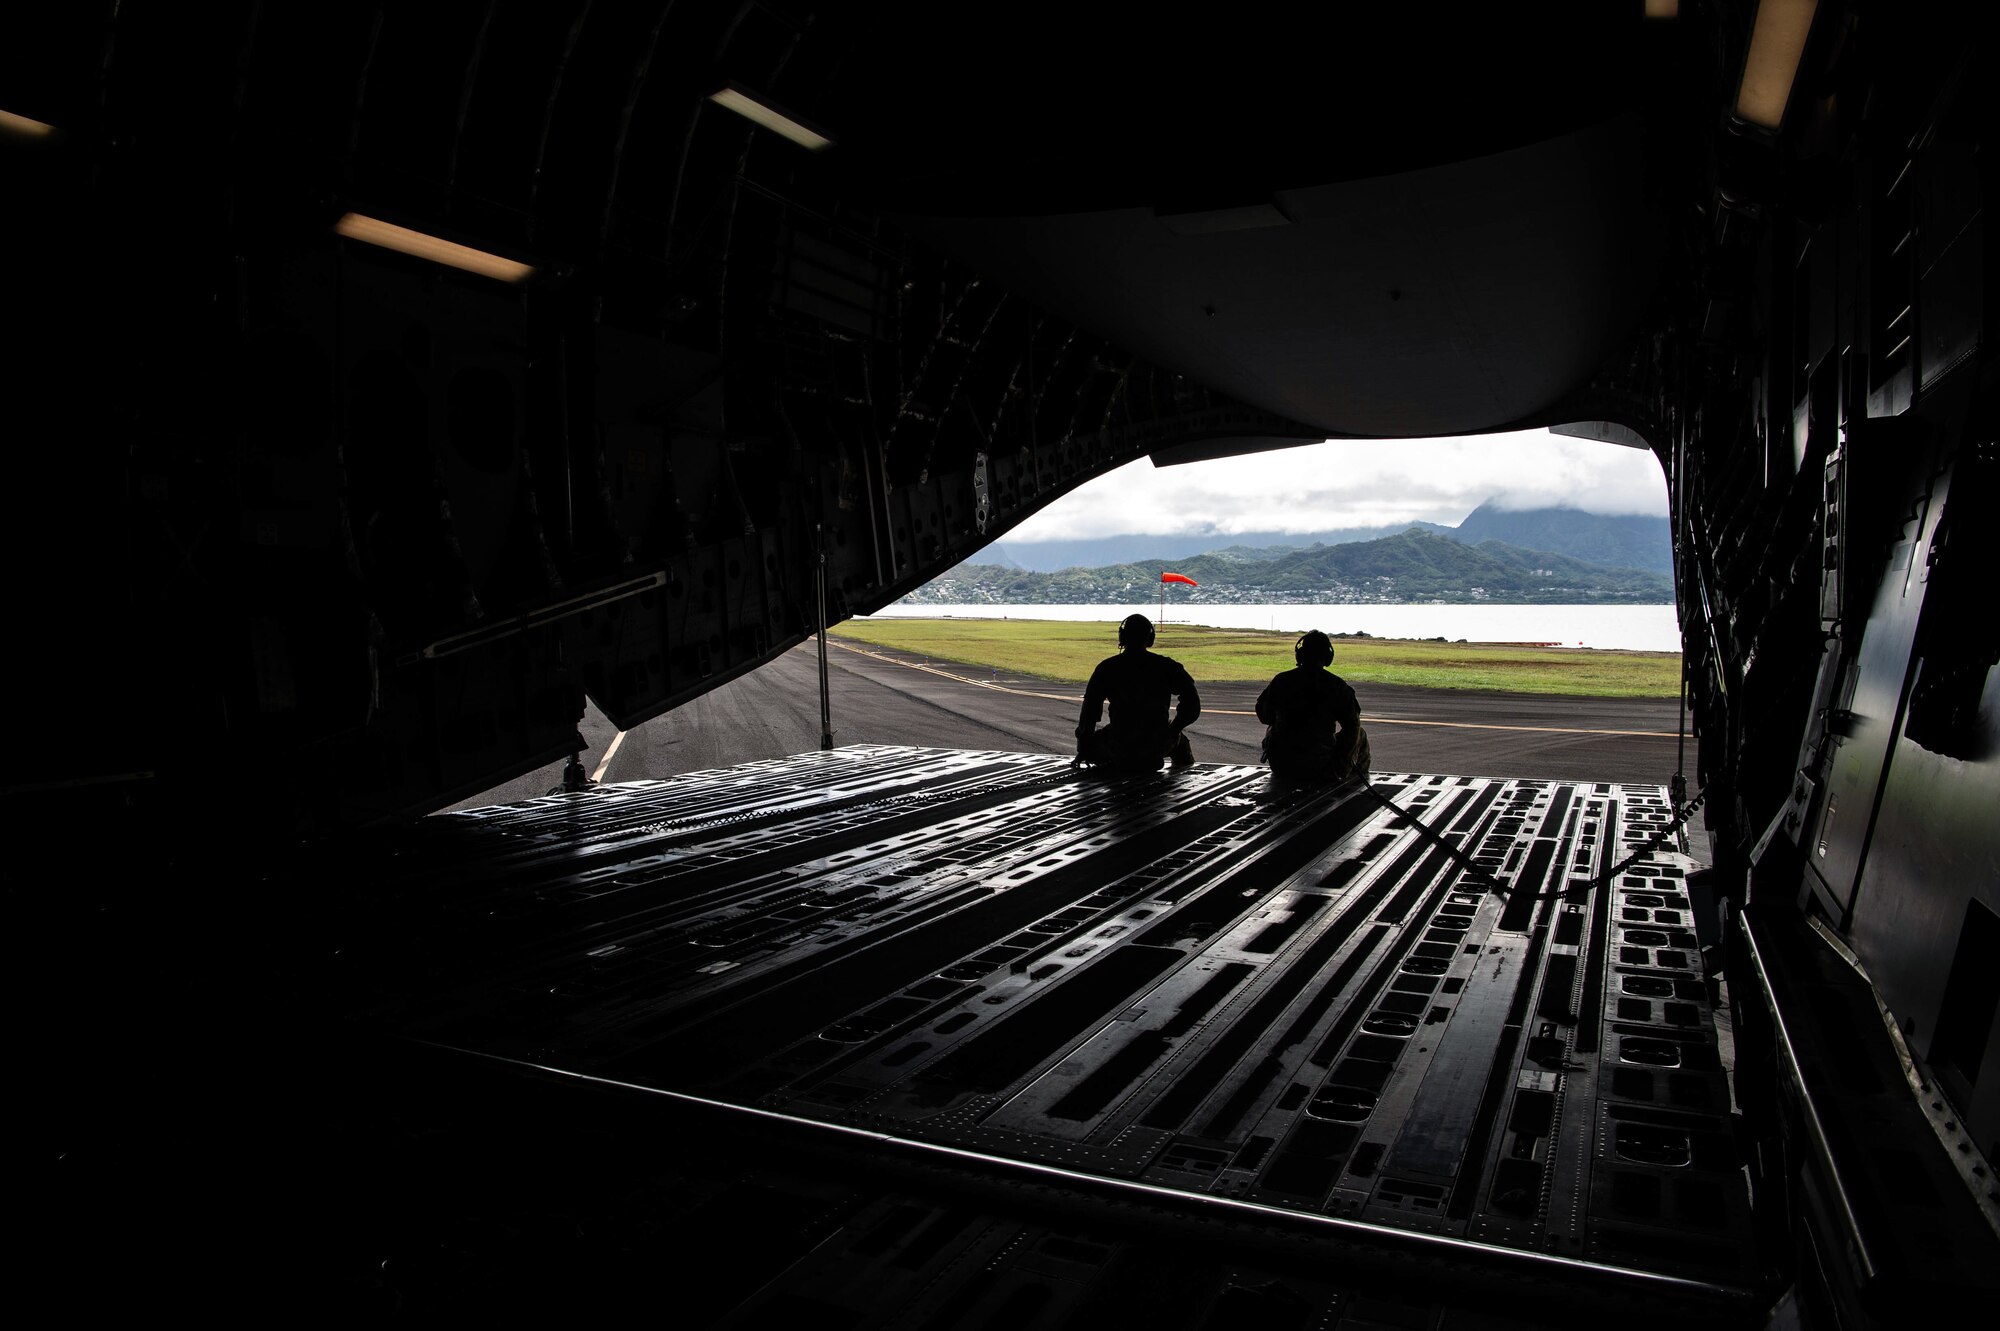 Airmen call out instructions over the intercom during training aboard a C-17 Globemaster III.